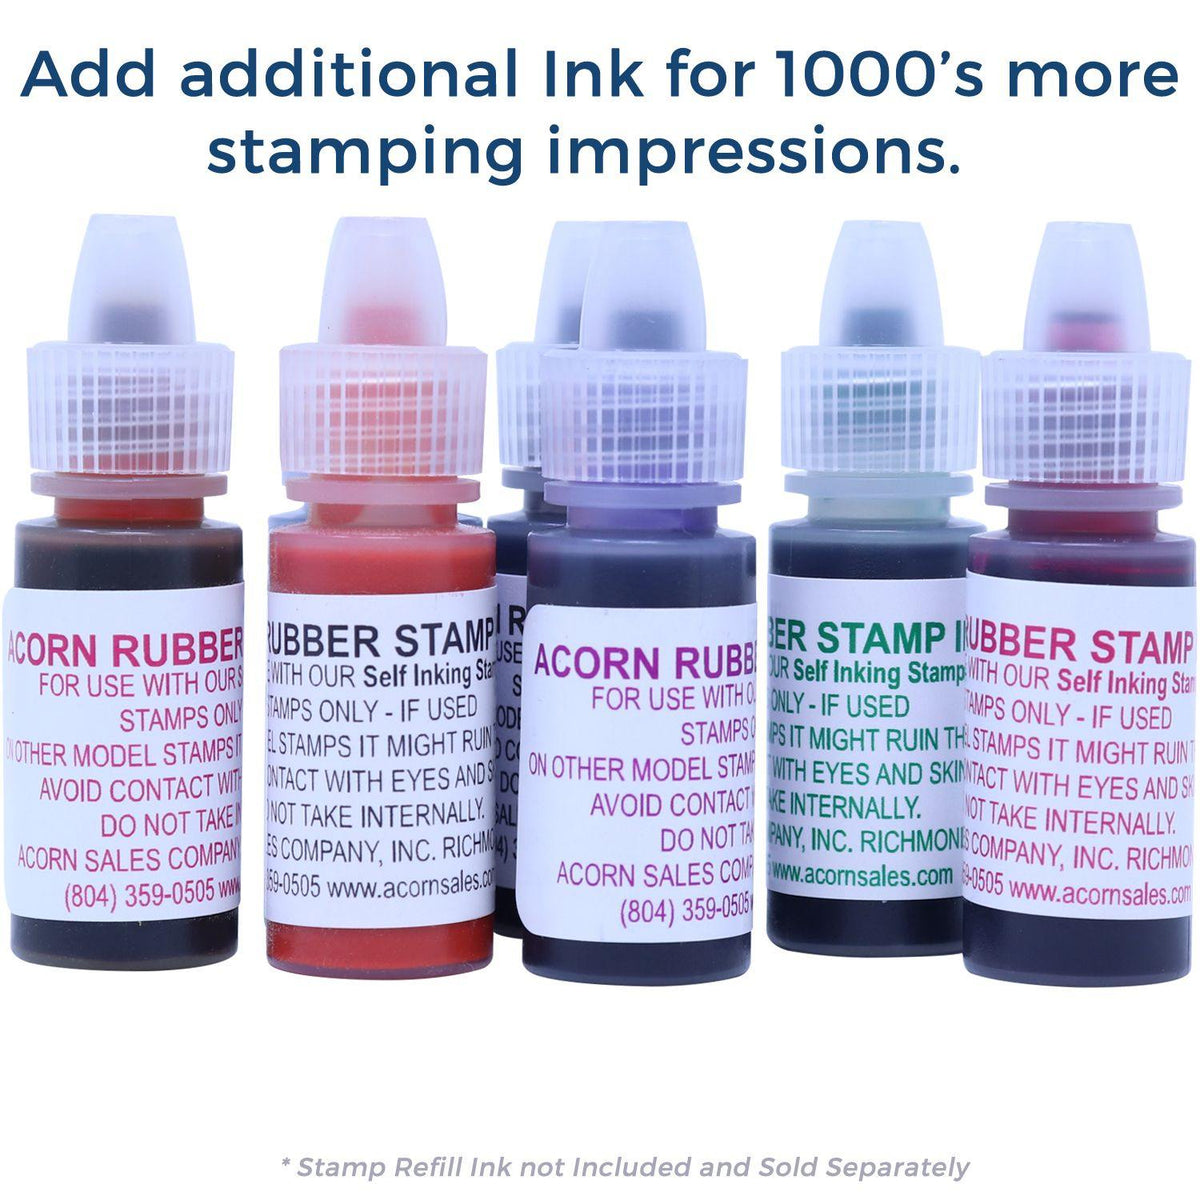 Refill Inks for Large Pre-Inked Faxed with Round Date Box Stamp Available